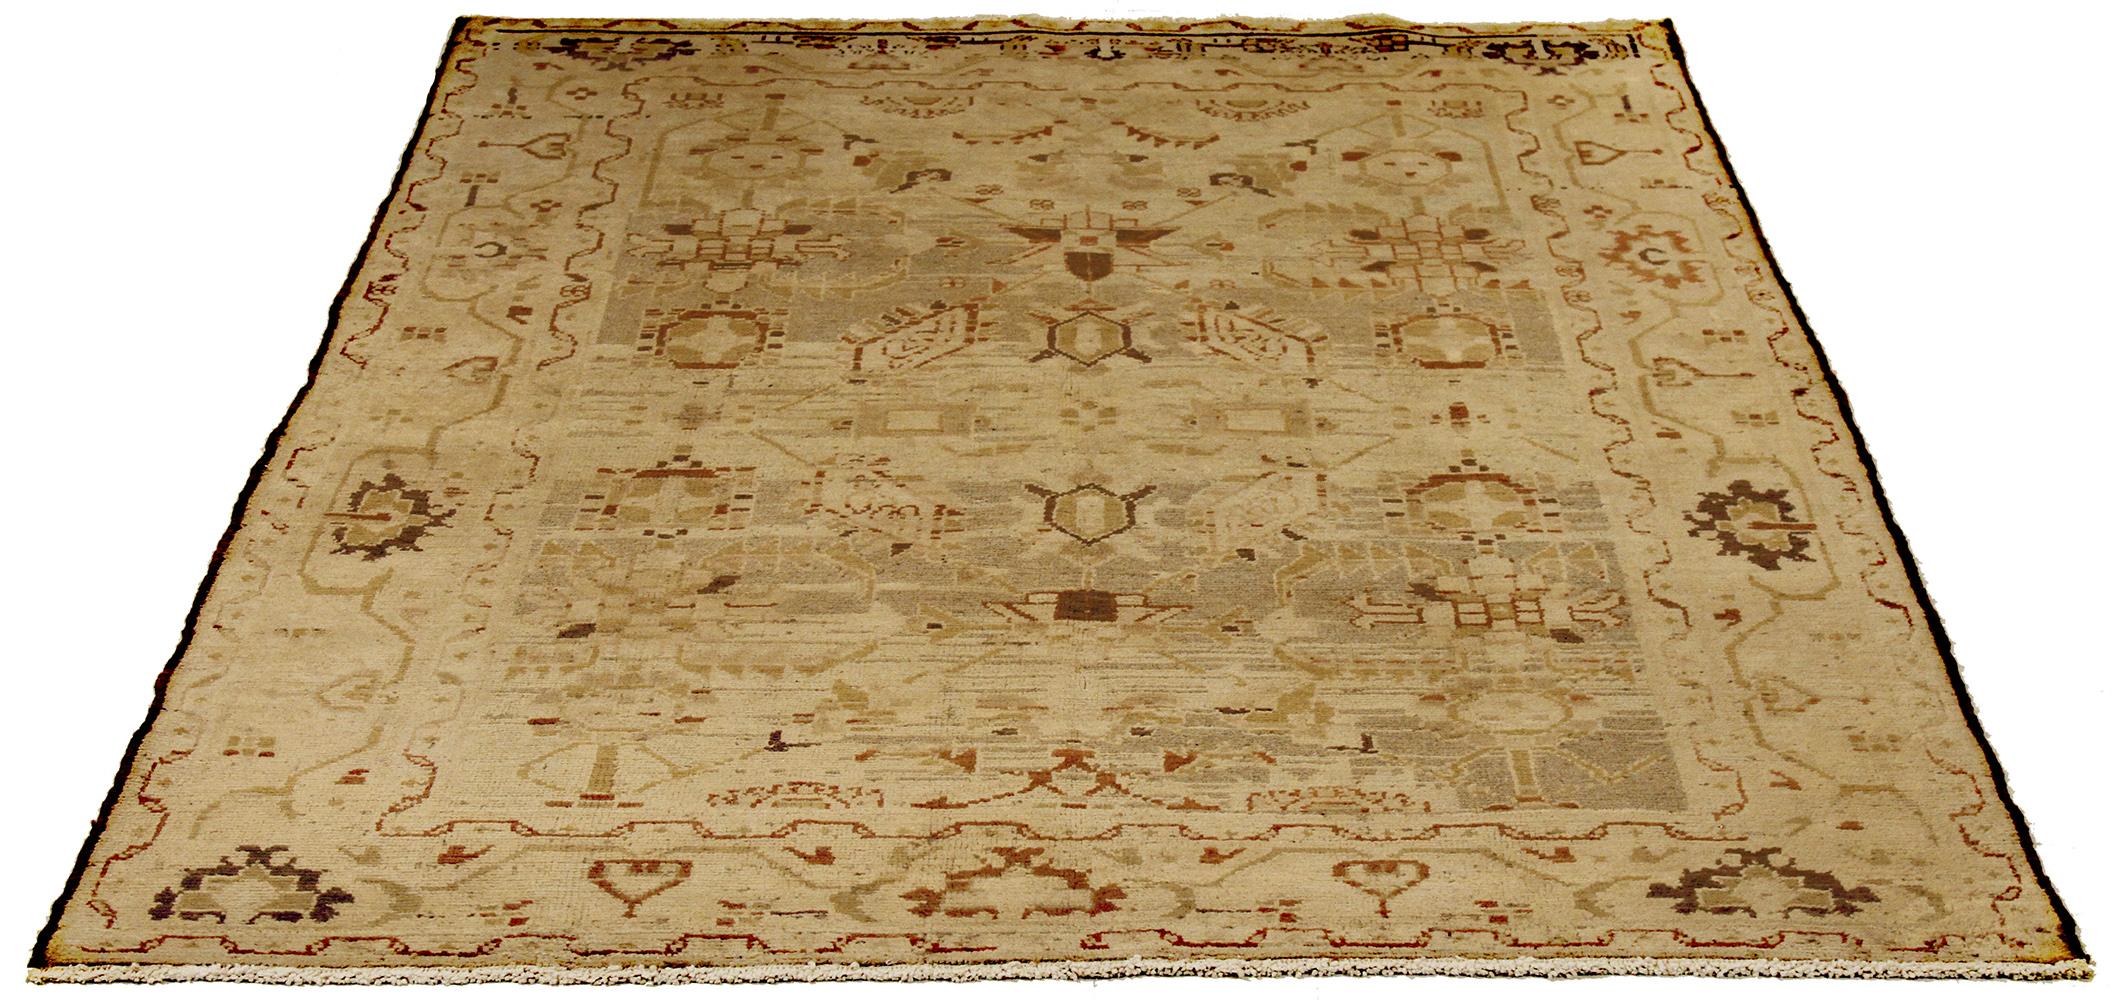 Antique Persian runner rug handwoven from the finest sheep’s wool and colored with all-natural vegetable dyes that are safe for humans and pets. It’s a traditional Malayer design featuring beige and brown tribal details over an ivory field. It’s a